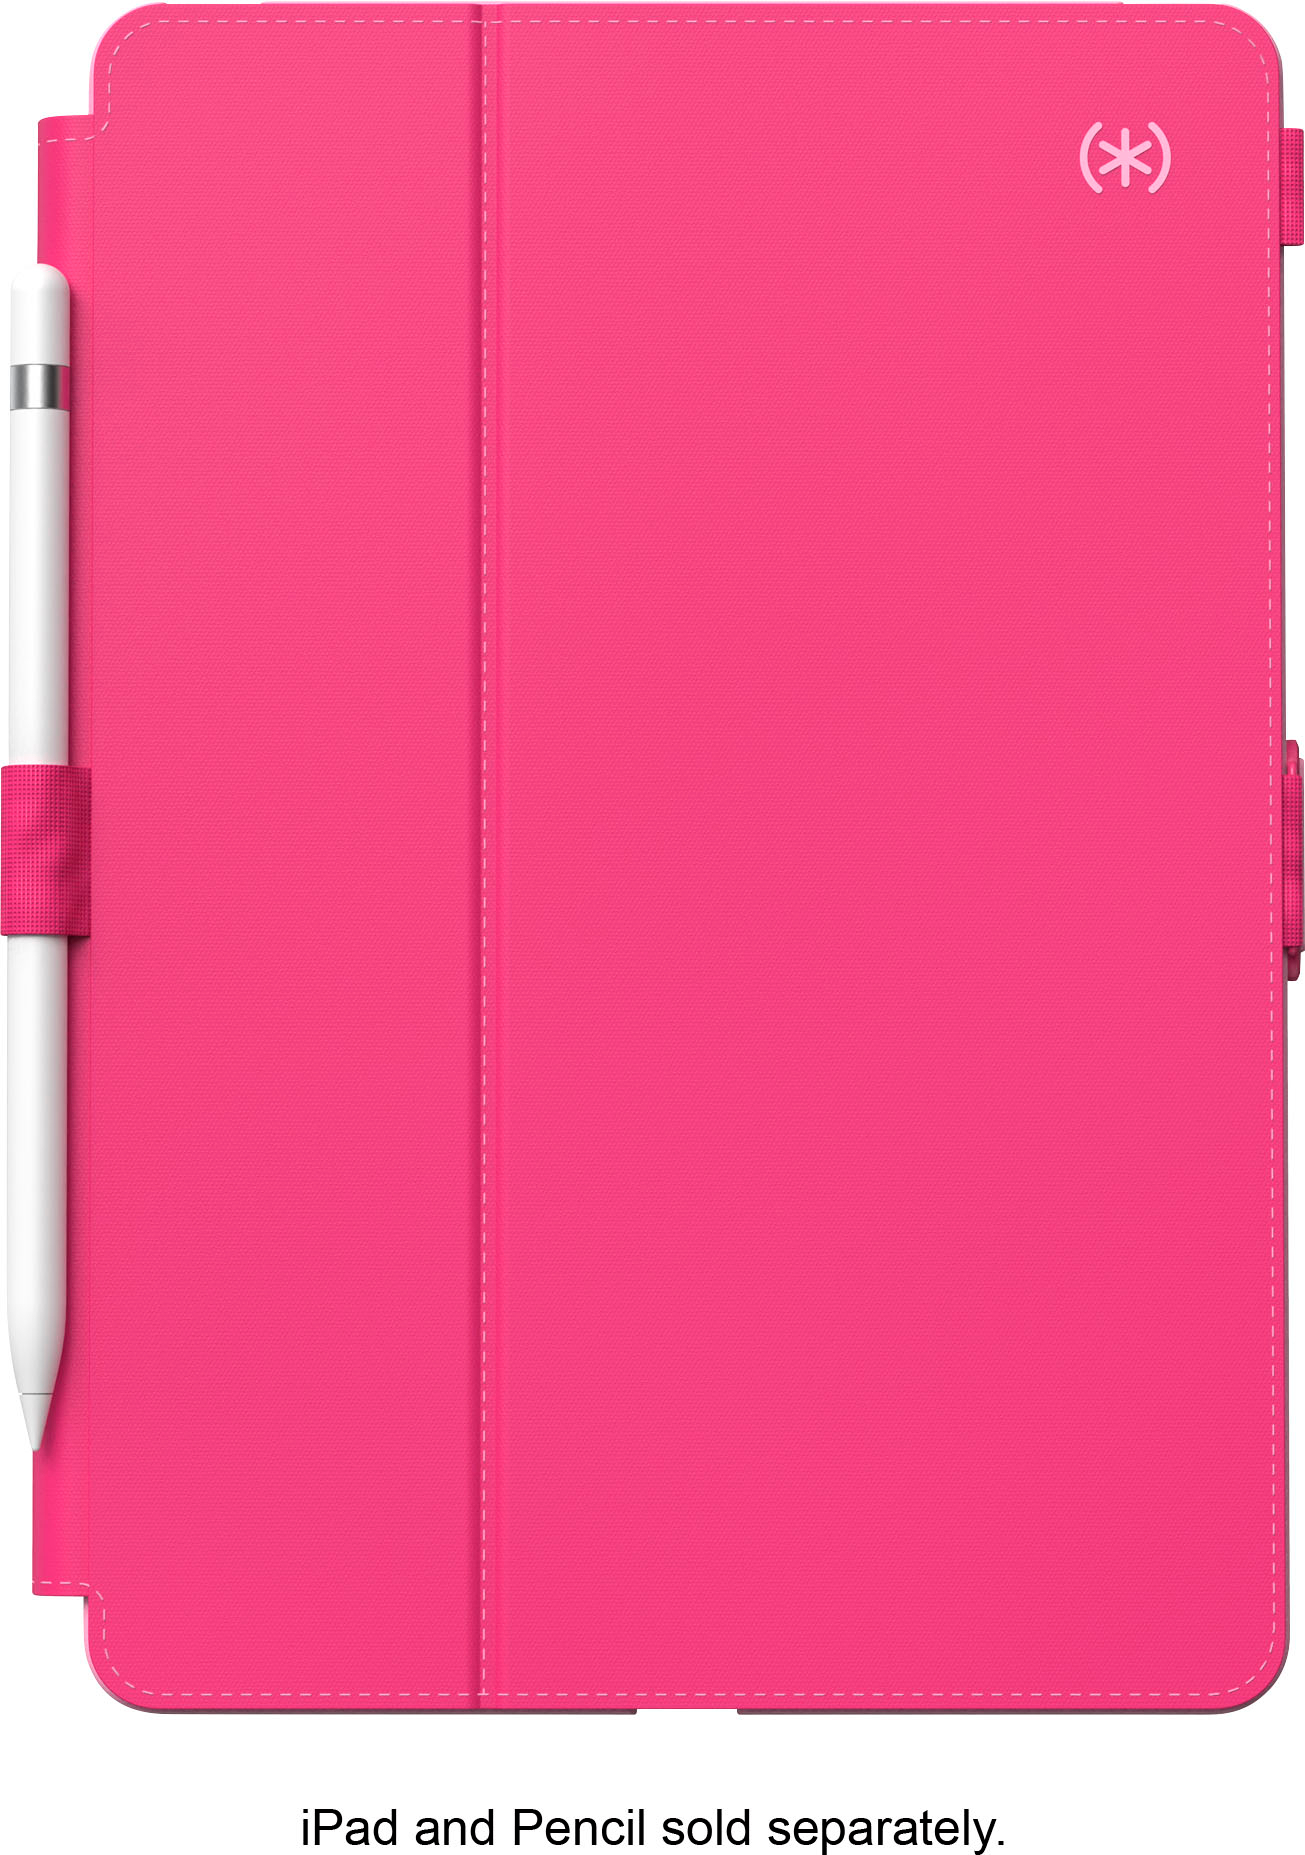 iPad Cases, Covers and Keyboard Folios – Best Buy